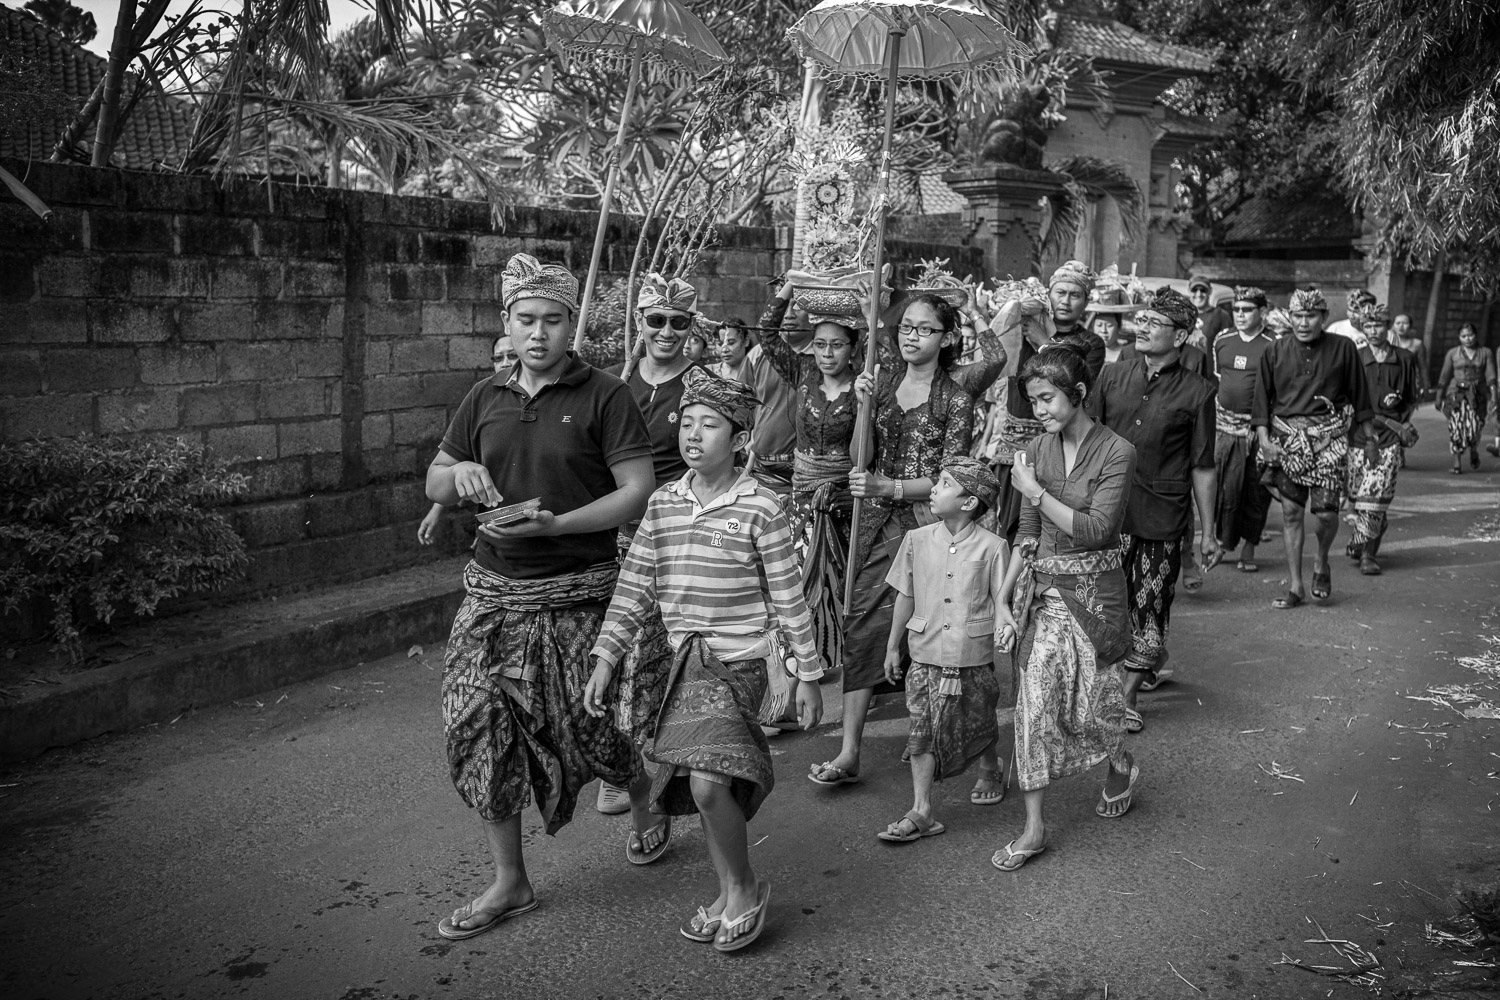 Ngaben cremation in Bali, the Dapdap tree carried in the procession to the sea is considered magical because it grows so rapidly.